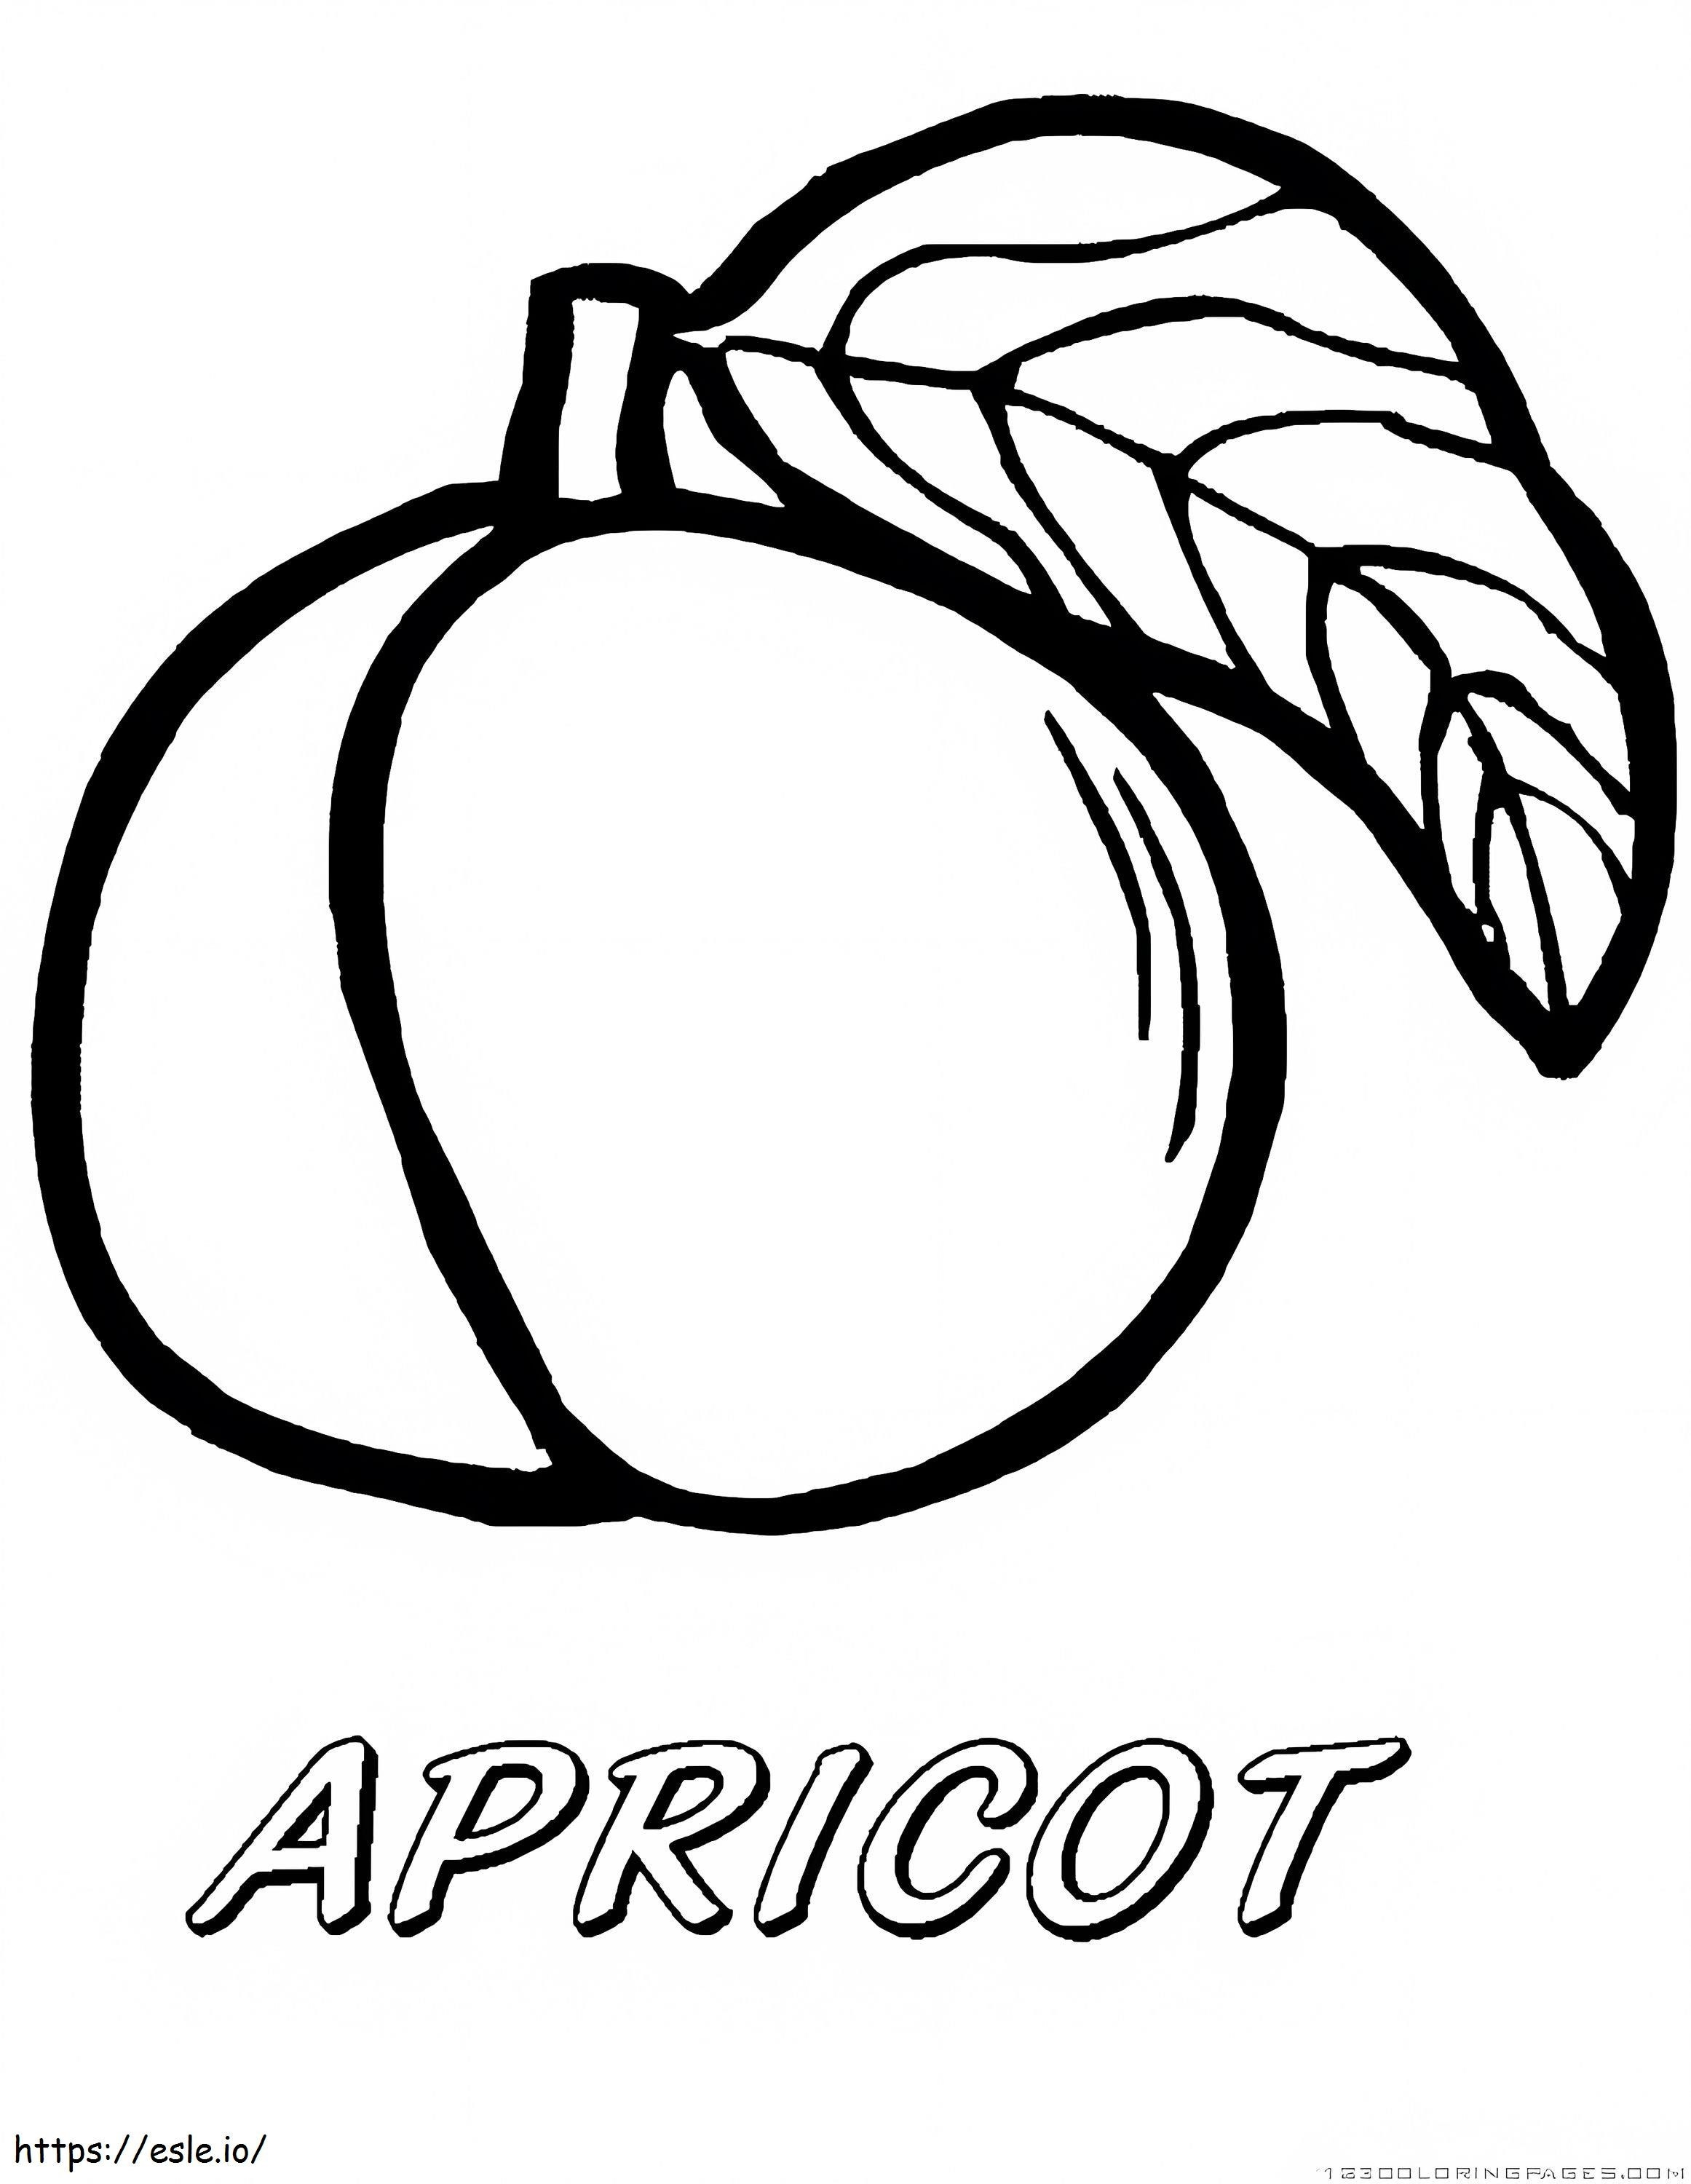 Apricot 9 coloring page